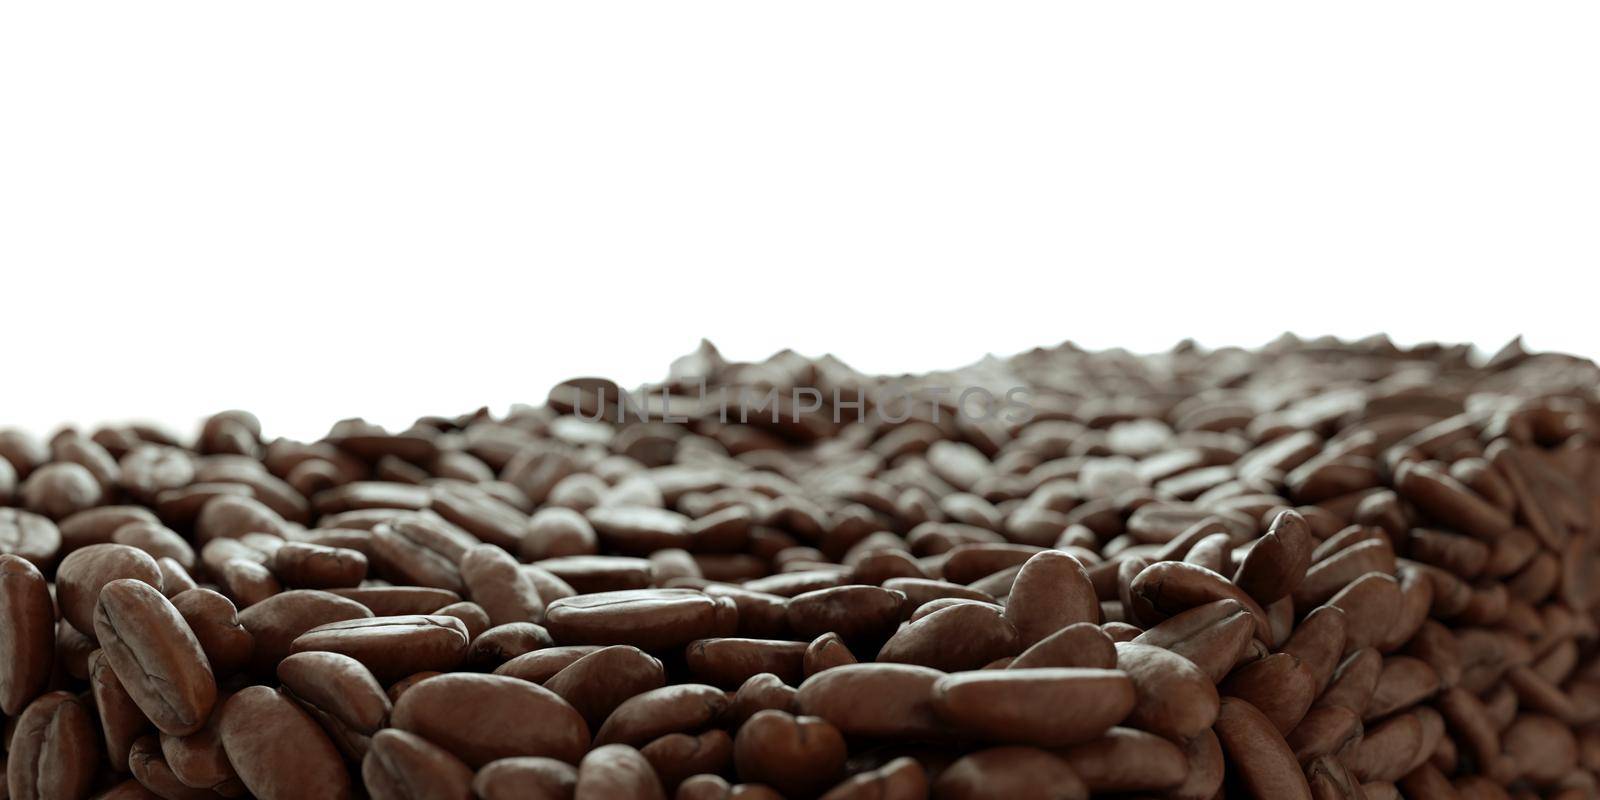 Roasted Coffee grains close-up on white (artistic shallow DOF)